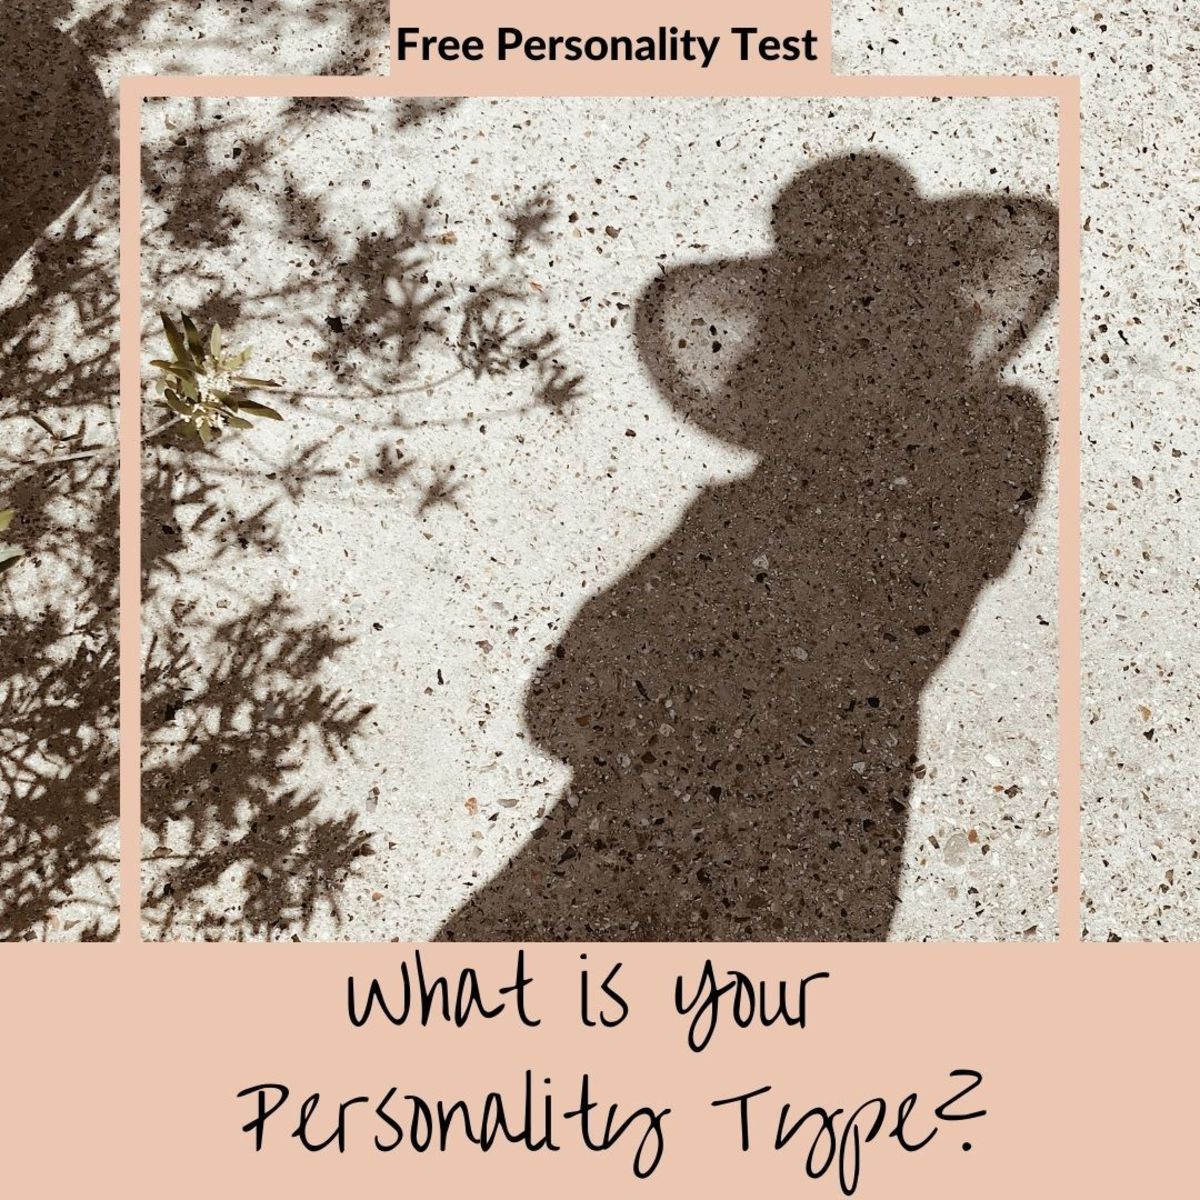 Personality Test - Assessing Your Own Personality